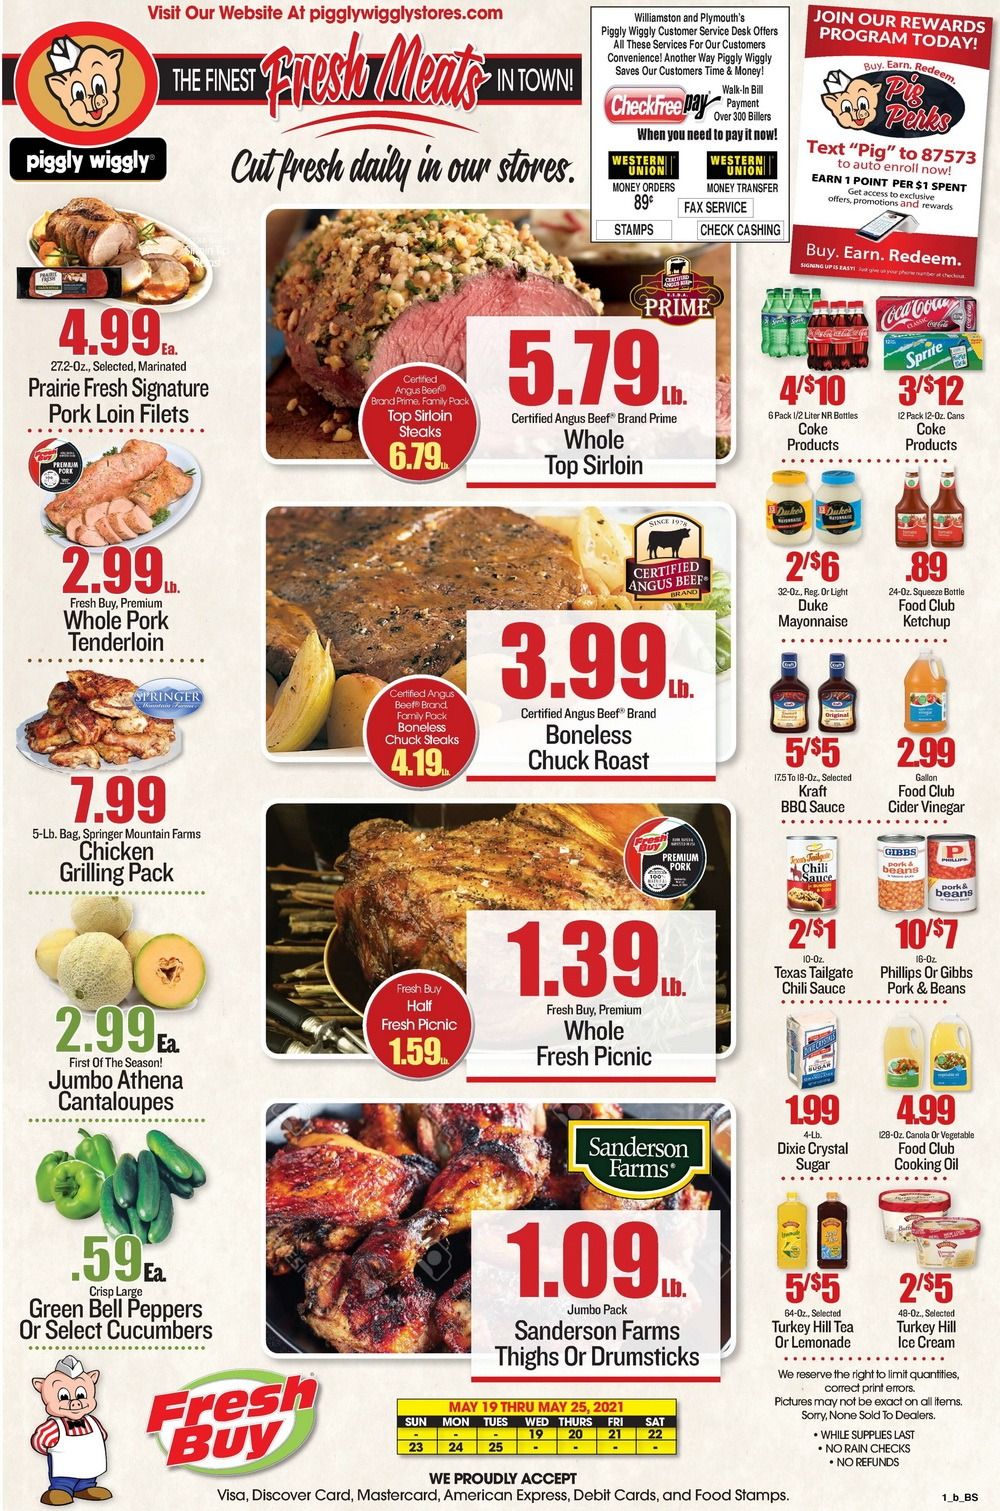 Piggly Wiggly Weekly Ad May 19 – May 25, 2021